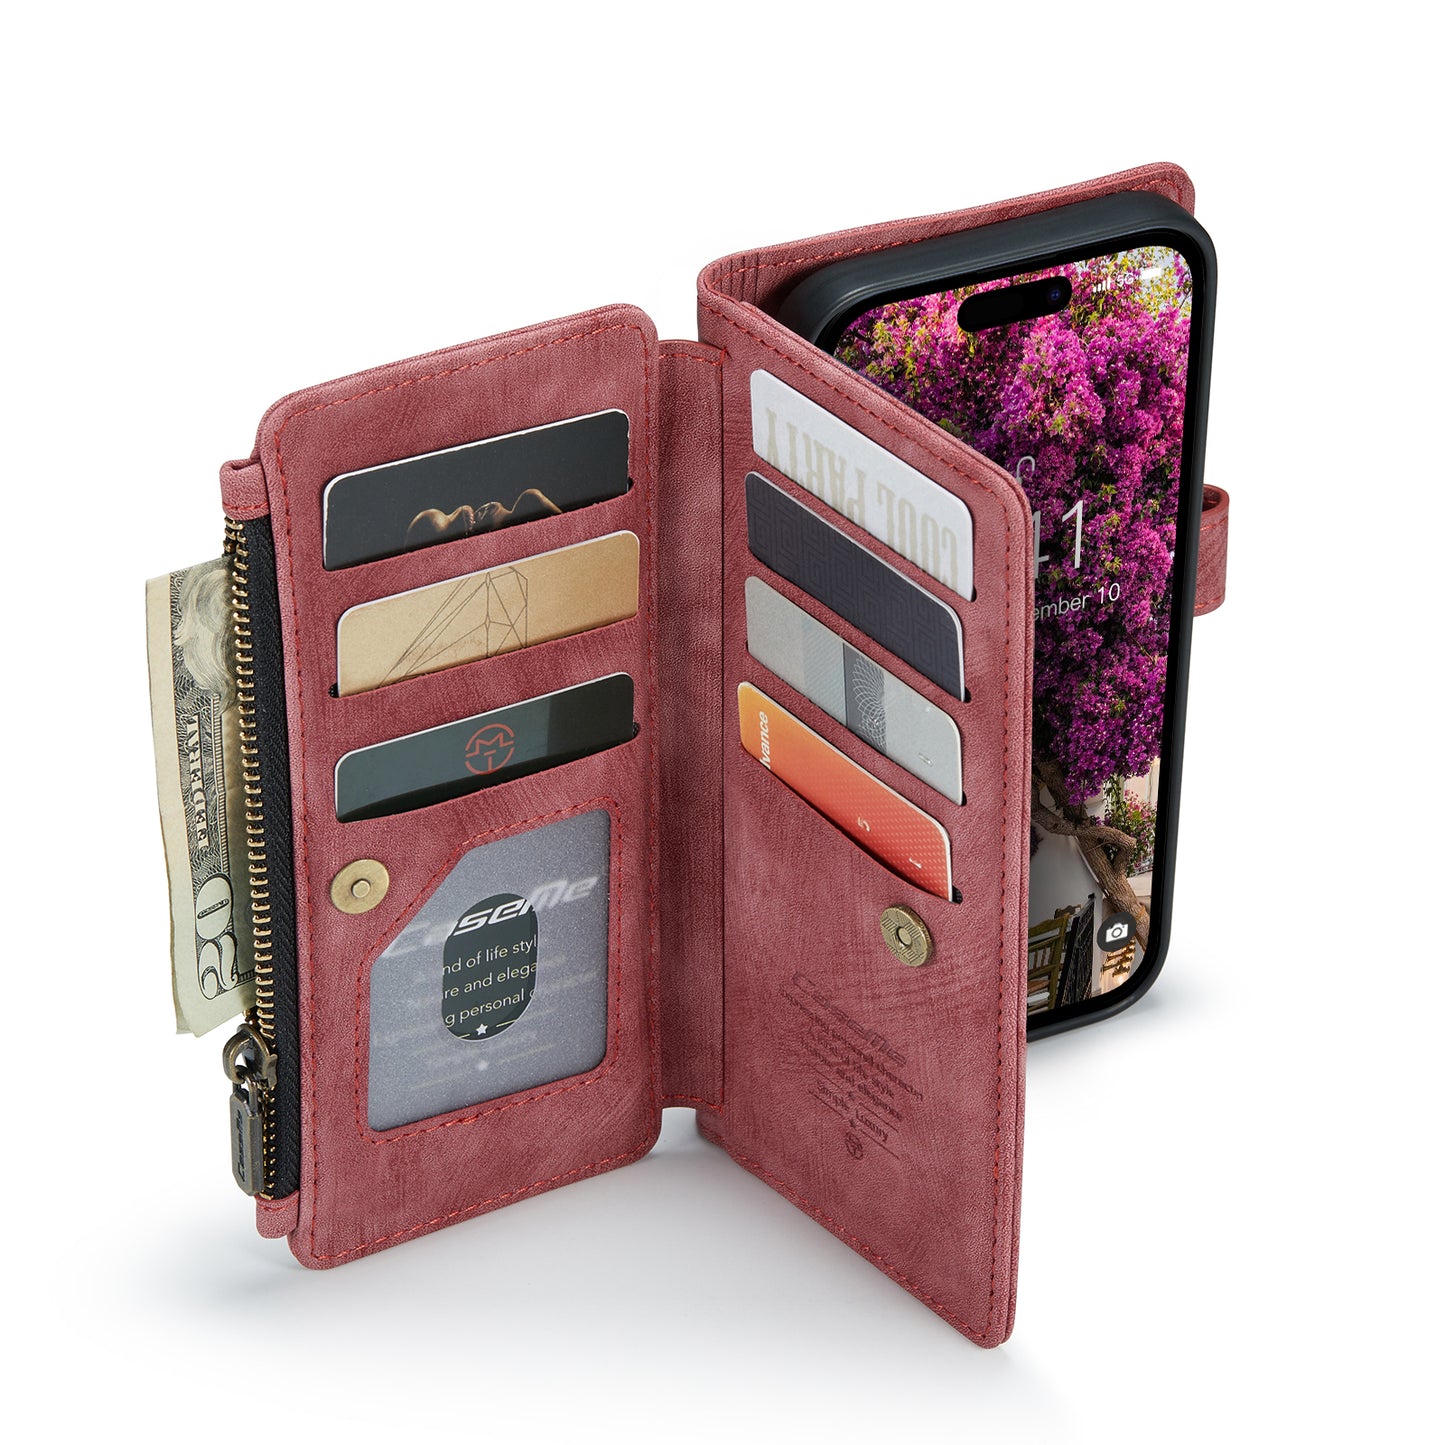 3-in-1 Functionality Durable Wallet  Case for iPhone